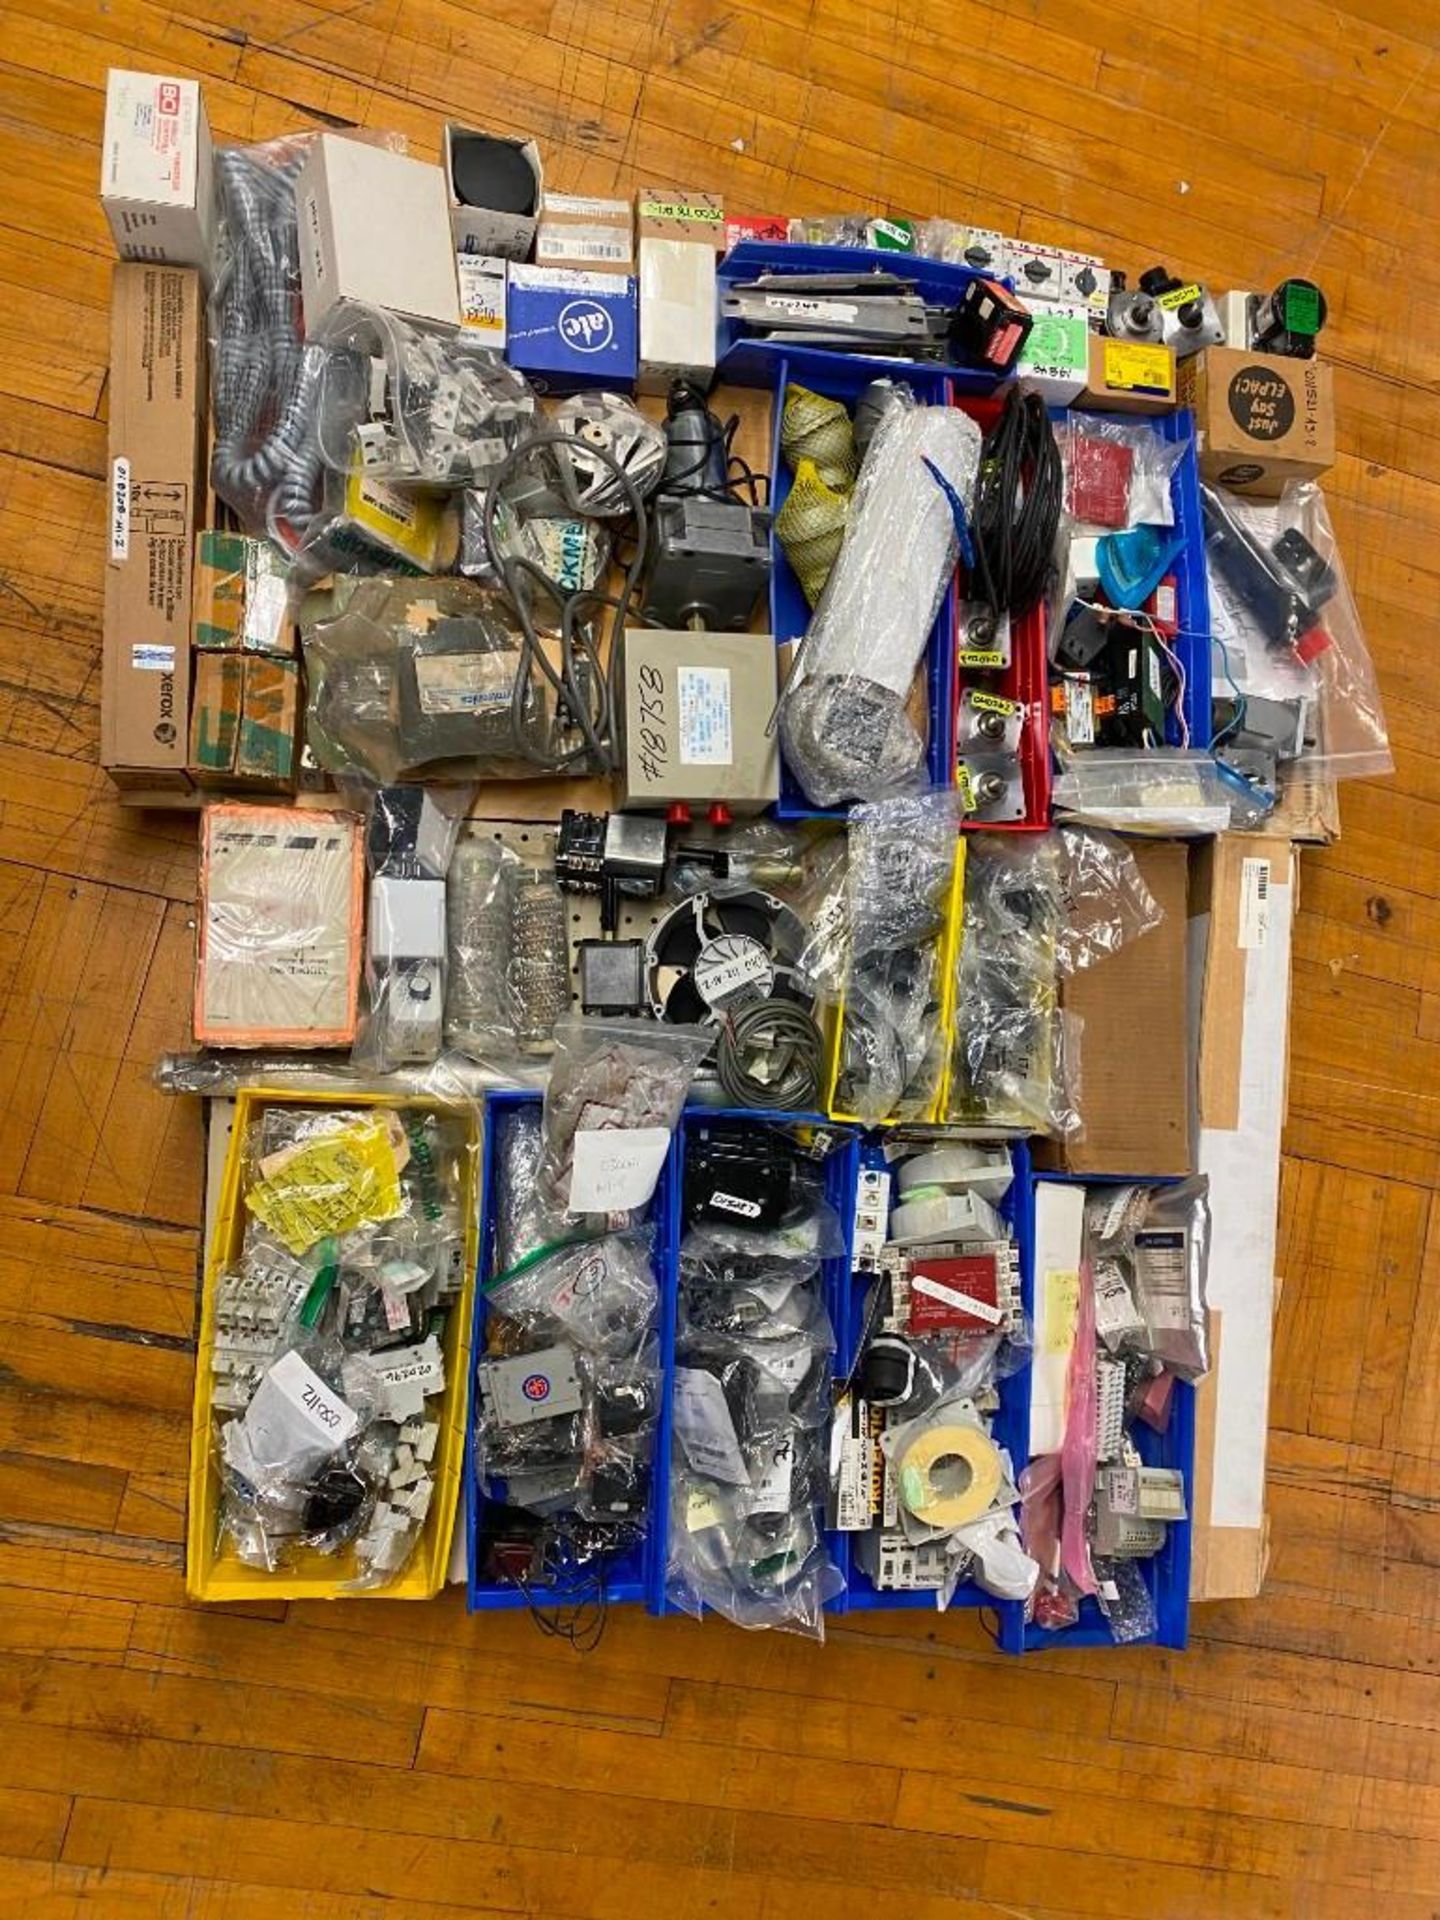 LOT OF MISCELLANEOUS ELECTRICAL COMPONENTS